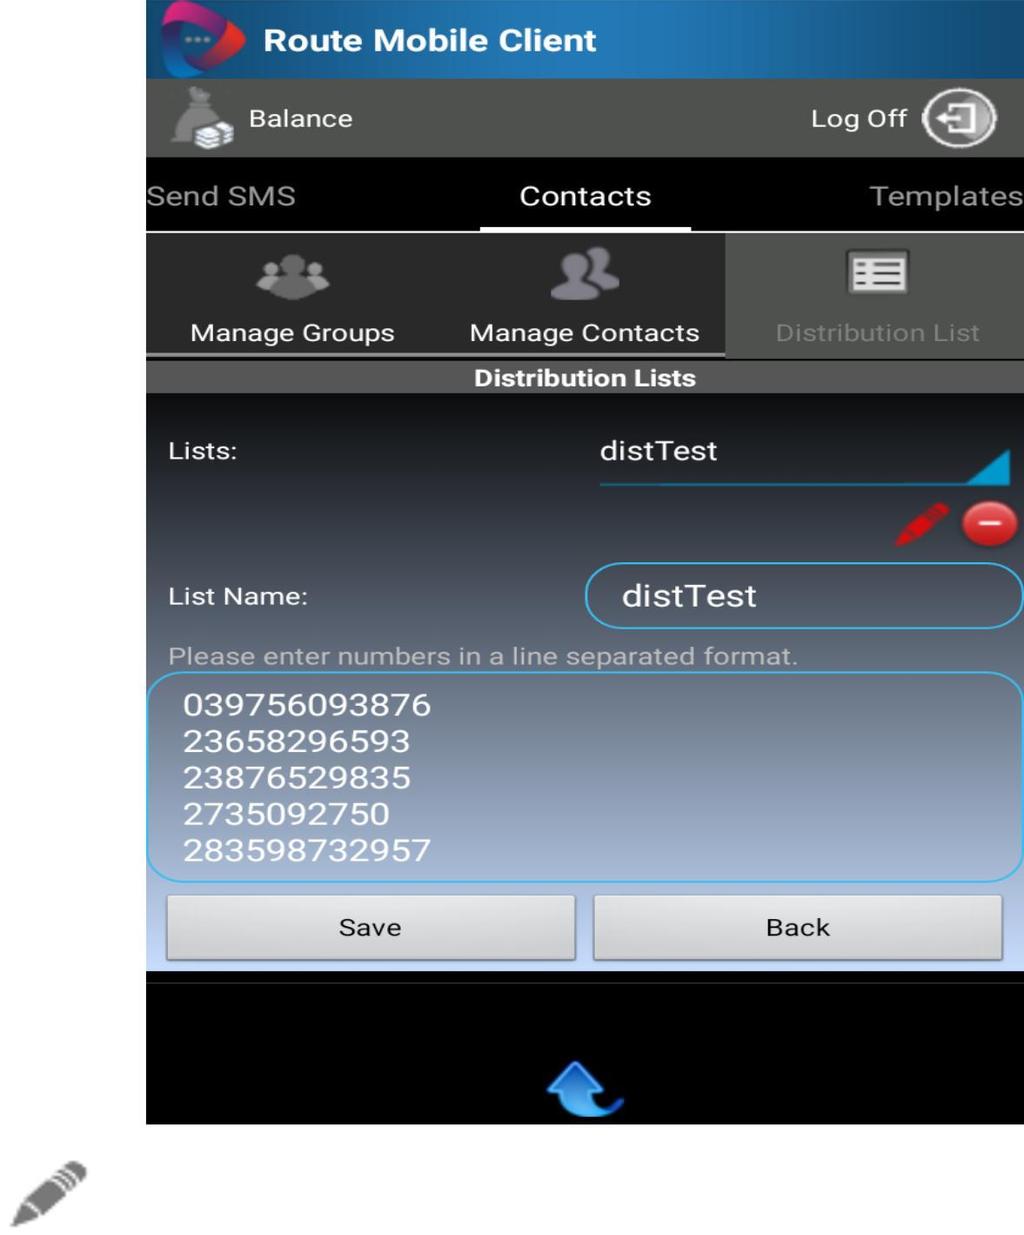 Distribution Lists User can create list in which user can add n number of contacts separated by \n.